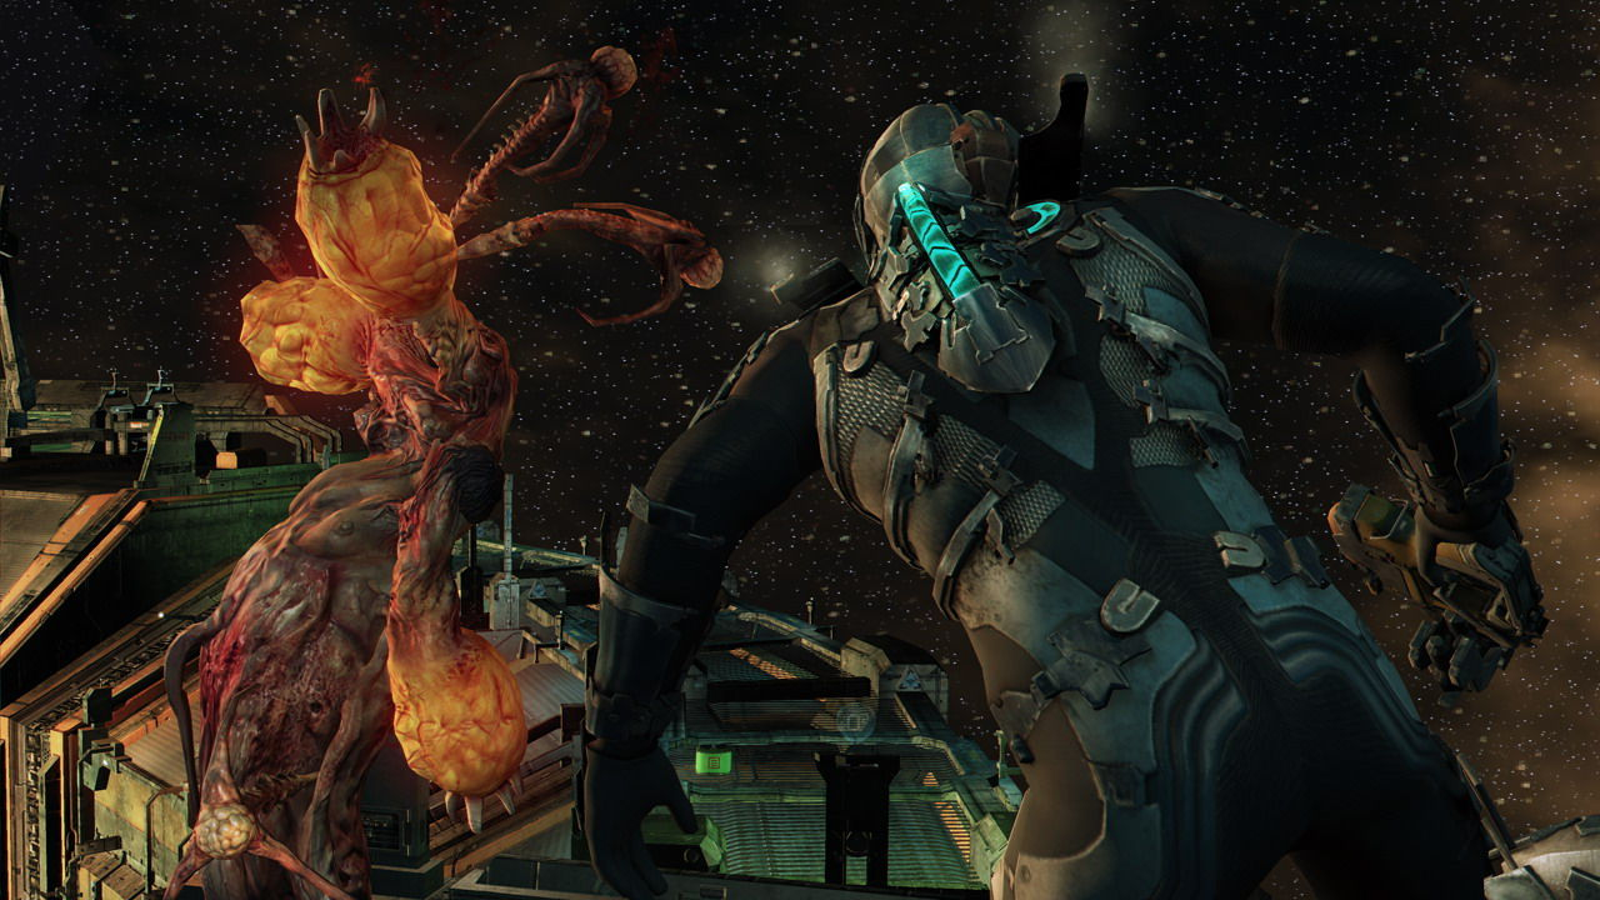 Dead Space 4 needs to ditch action and go back to horror